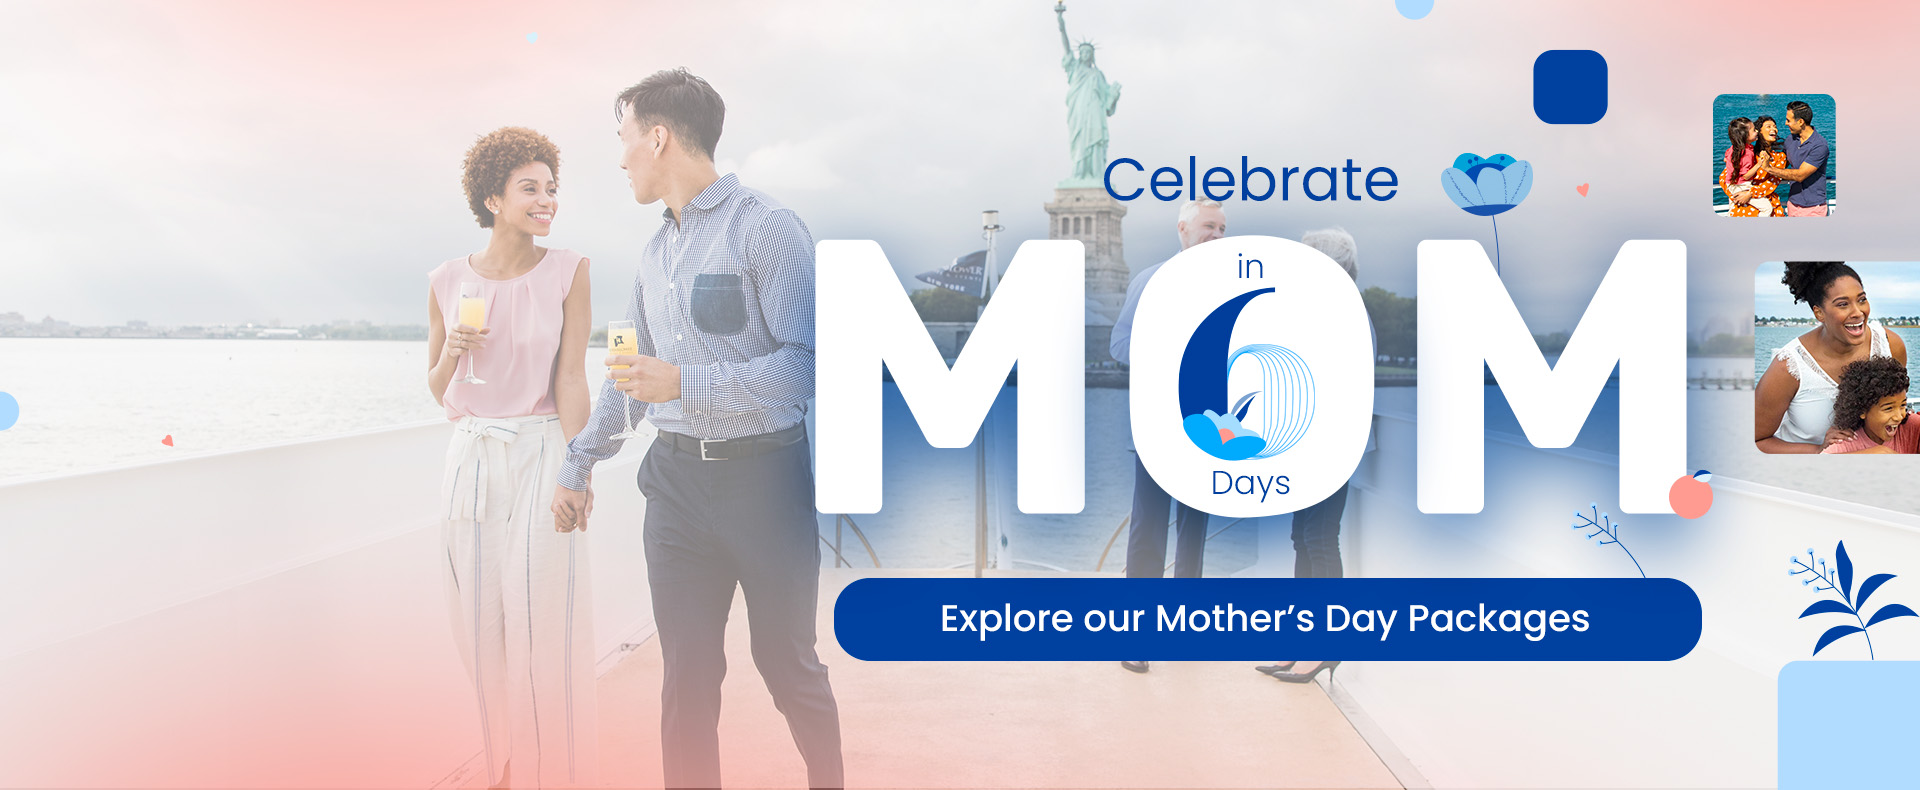 New York Mother’s Day countdoNew York Mother’s Day countdown 6 days awayn 6 days away